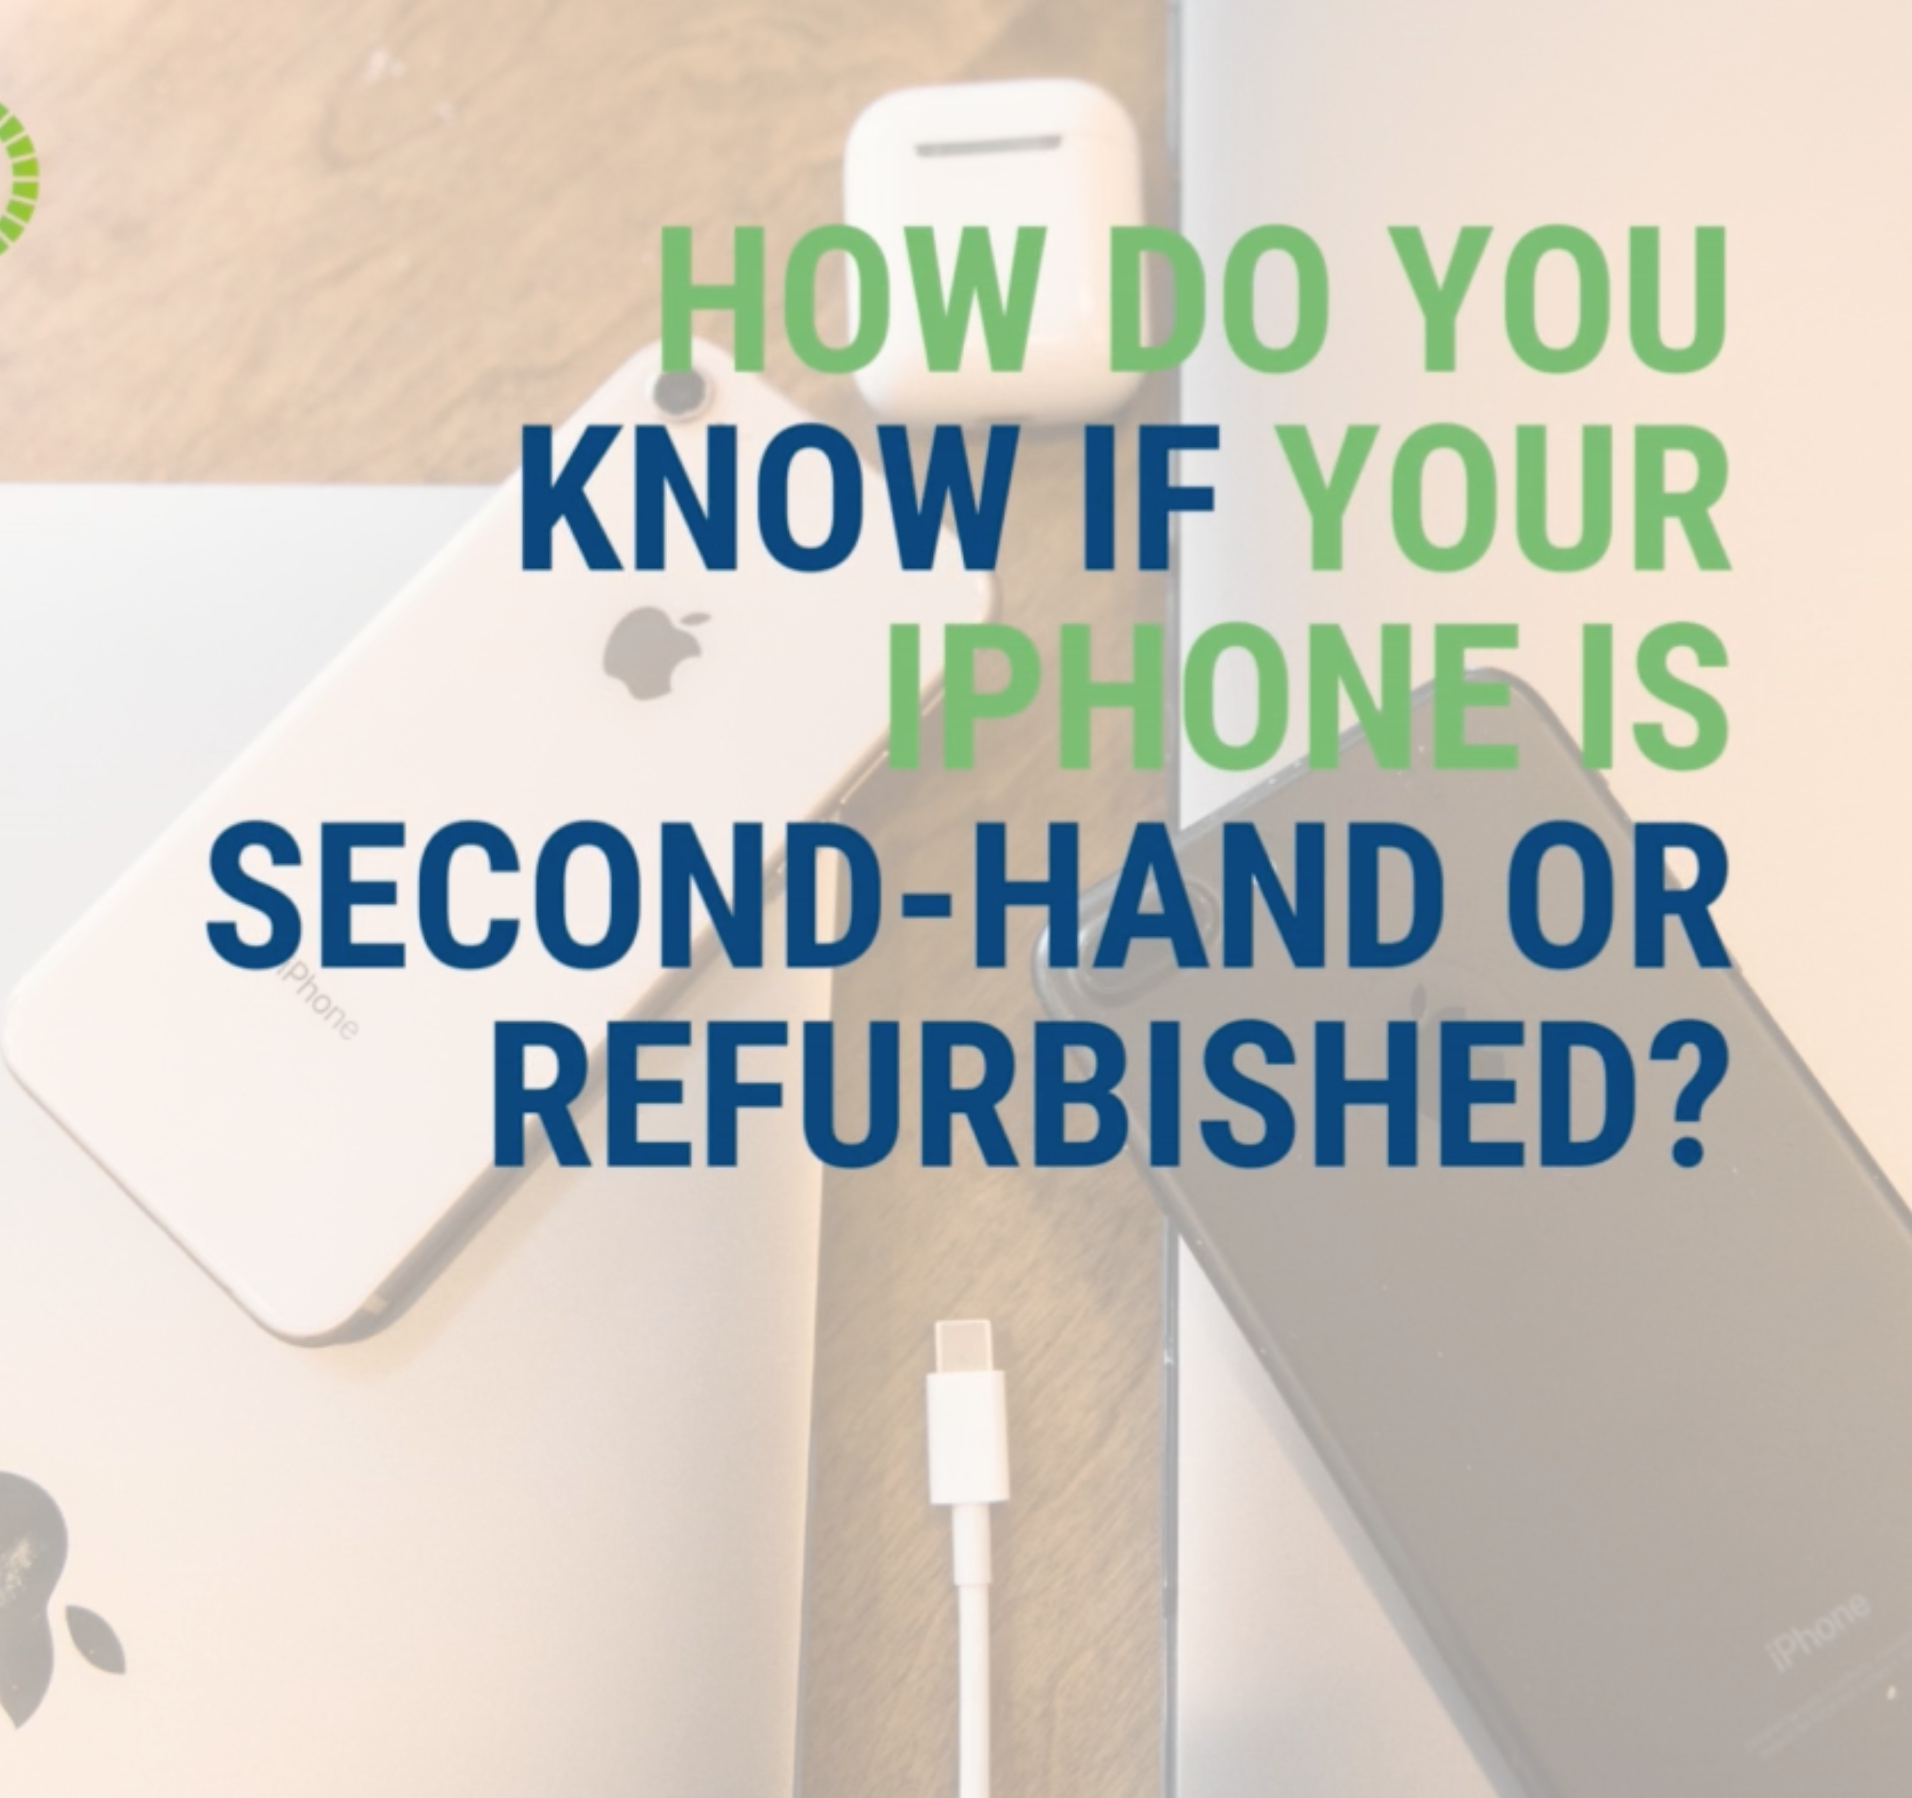 How to Identify if Your iPhone is Second-hand or Refurbished ?